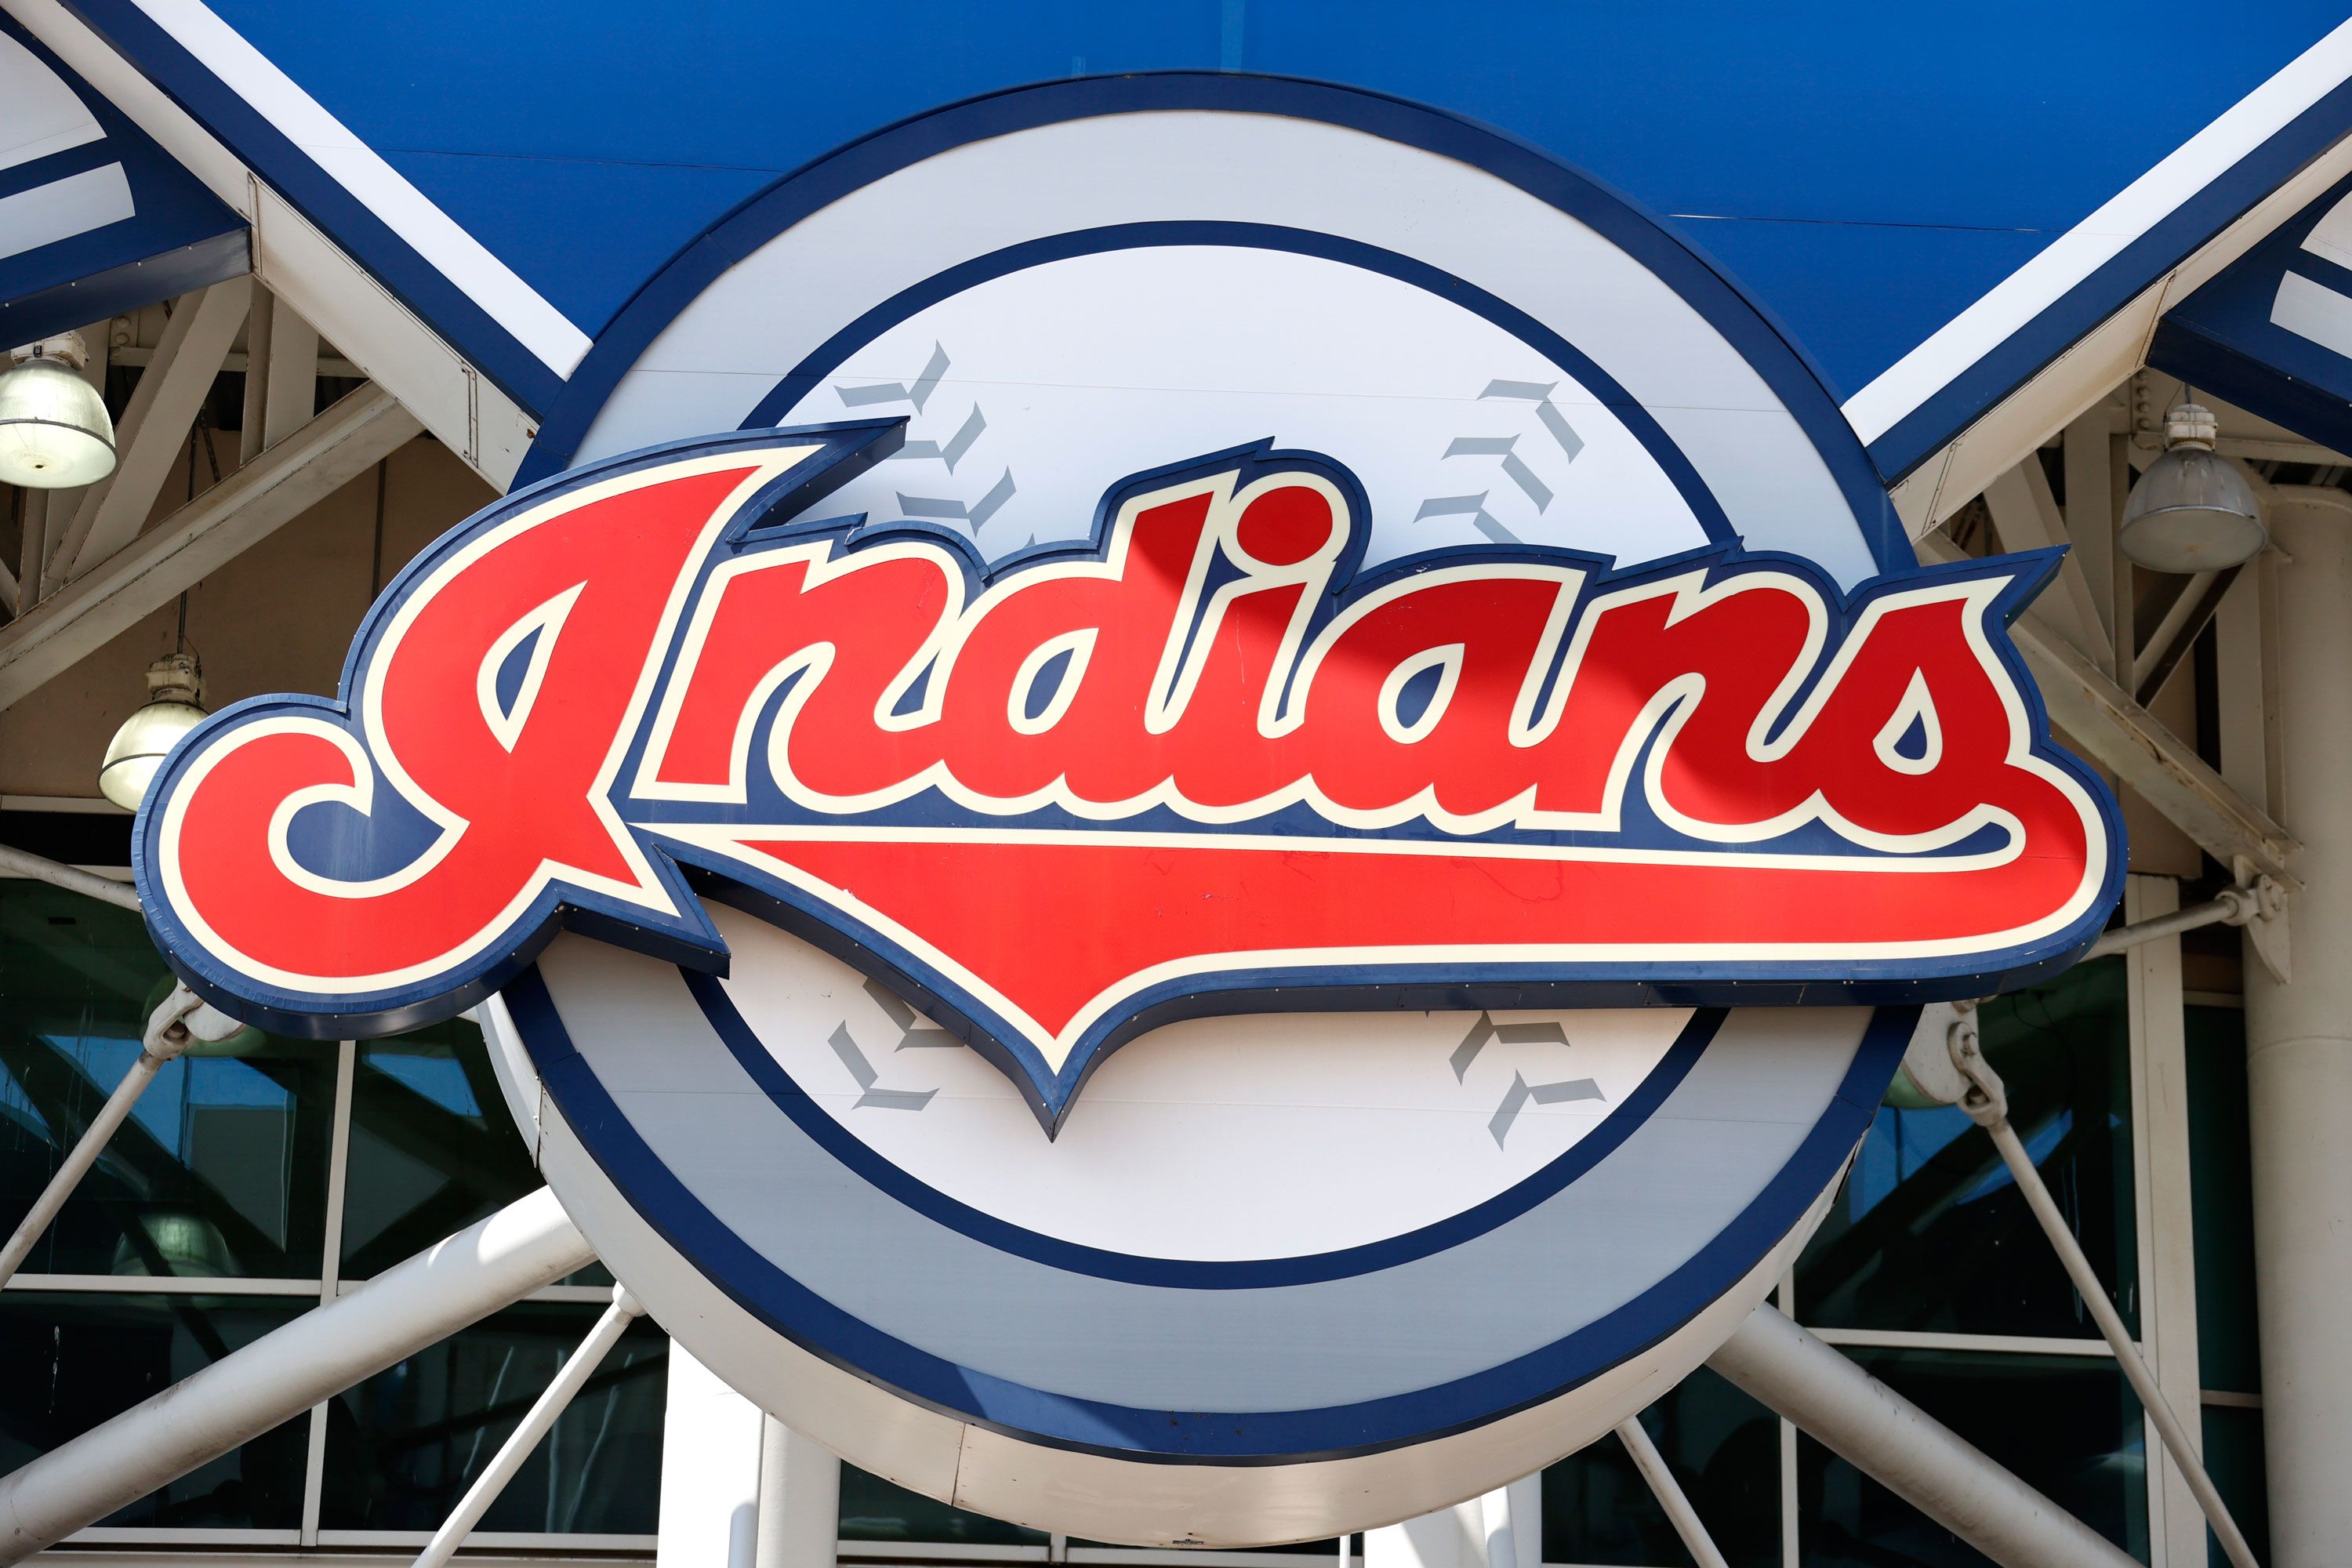 It's About Time the Cleveland Baseball Team Changed Its Name - The